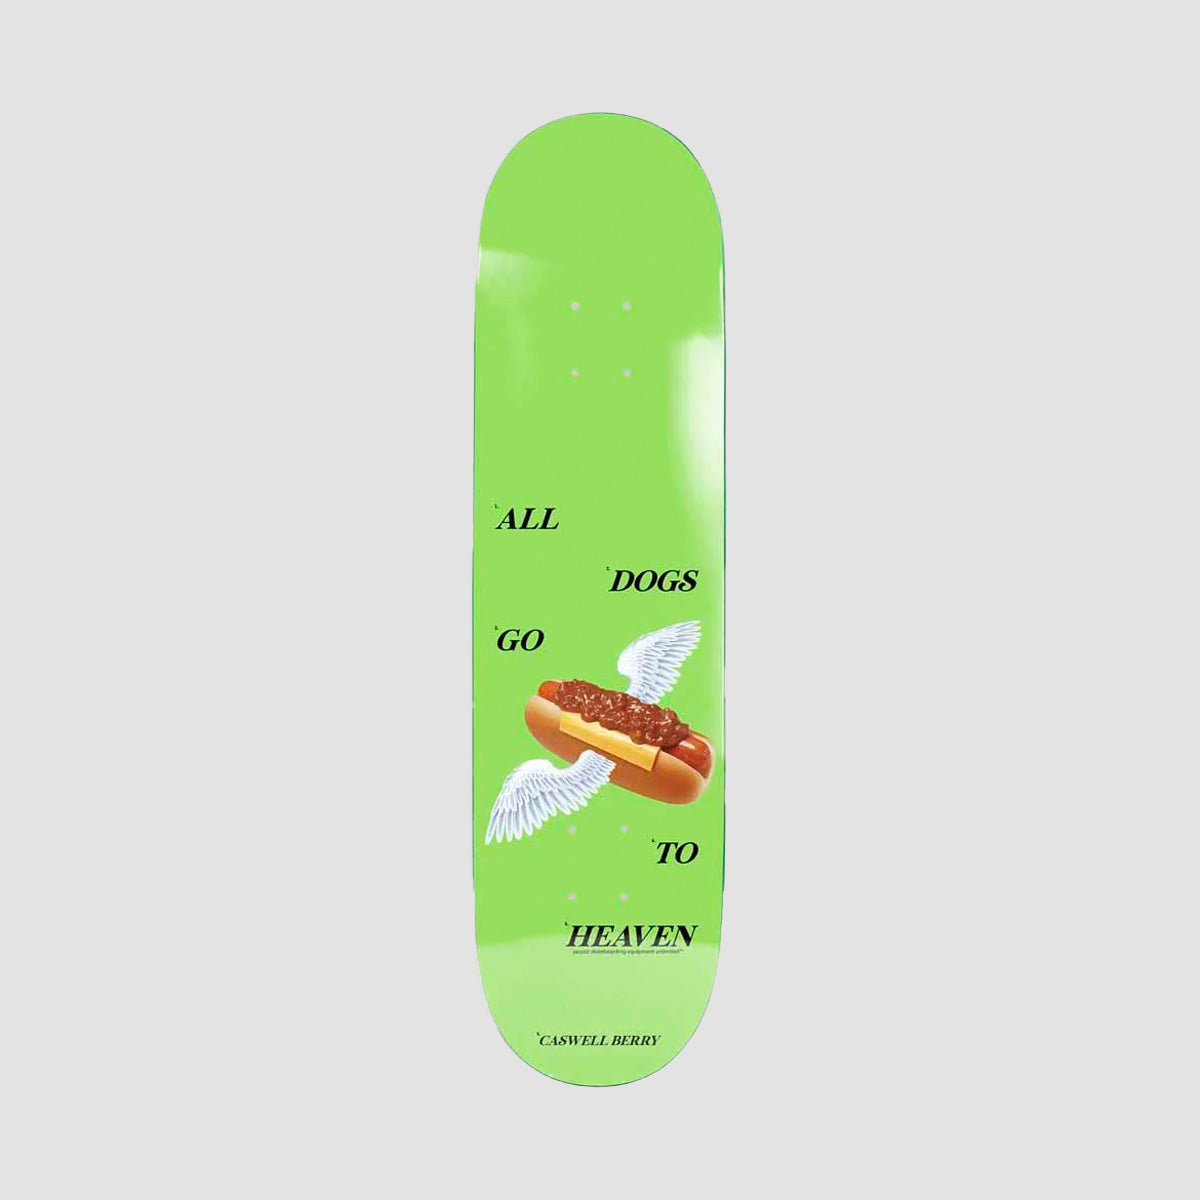 Jacuzzi Unlimited Caswell Berry Hot Dog Heaven Ex7 Skateboard Deck Green - 8.25"